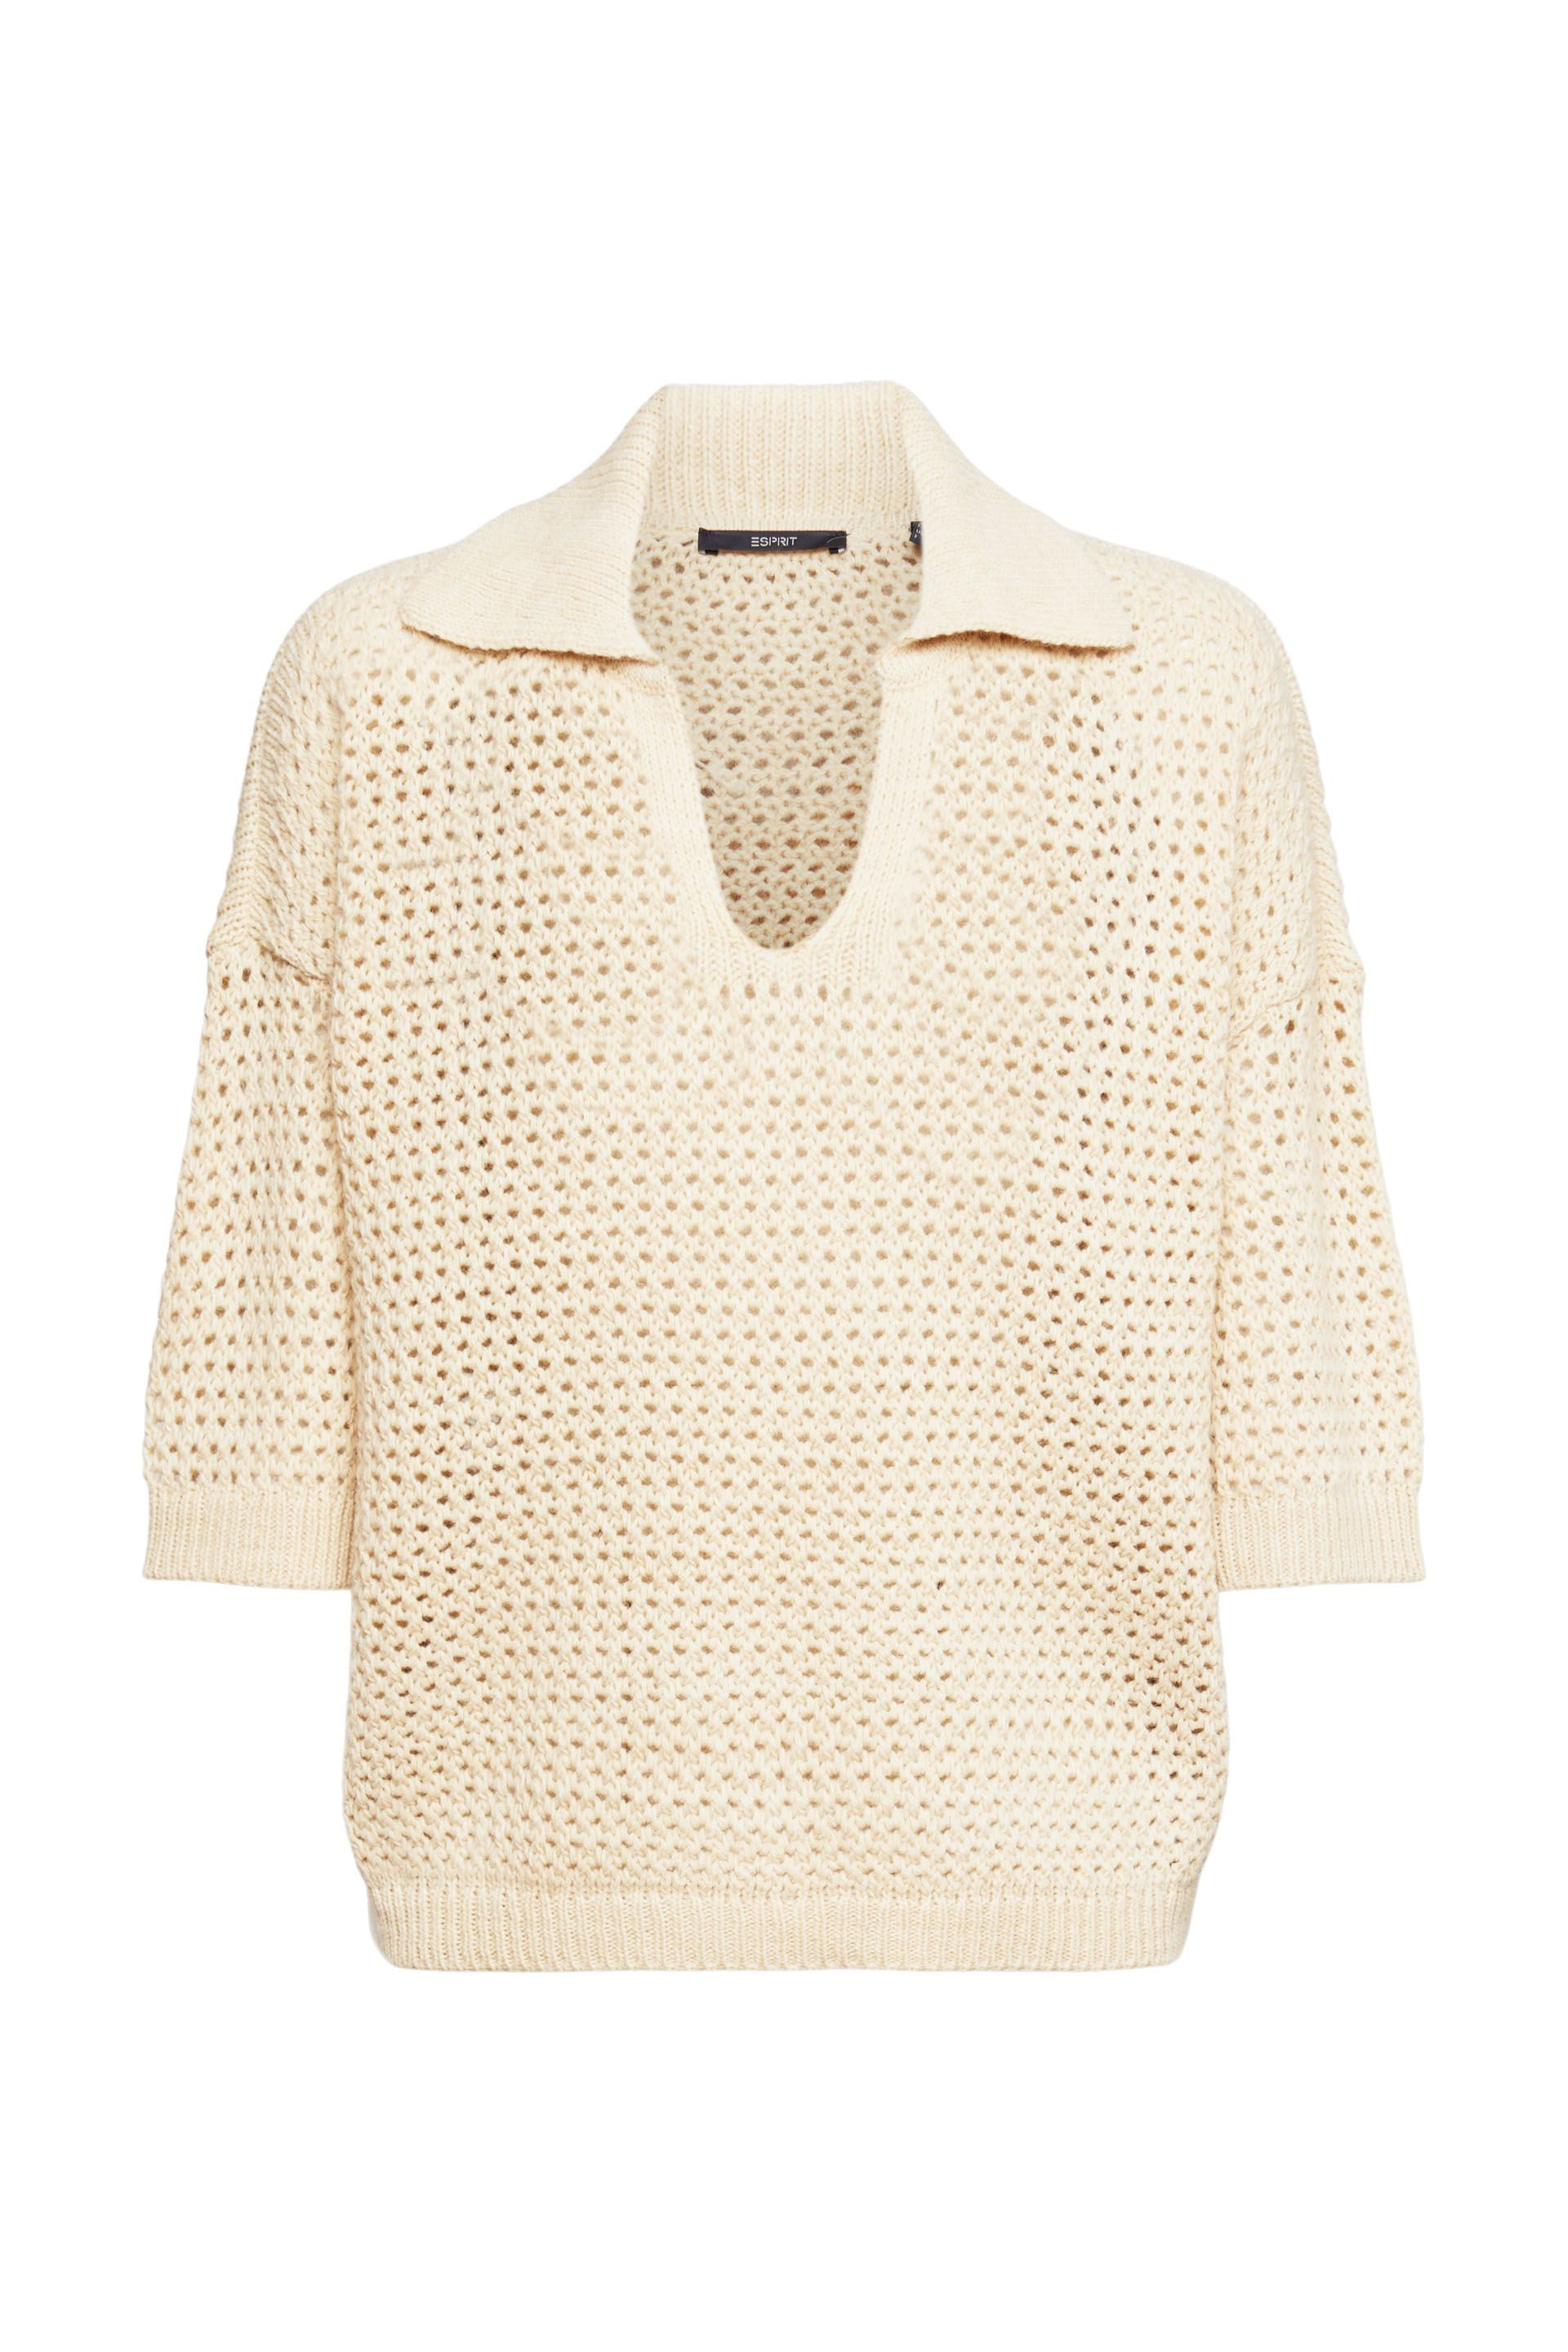 Pullover in structured mesh, Beige, large image number 0